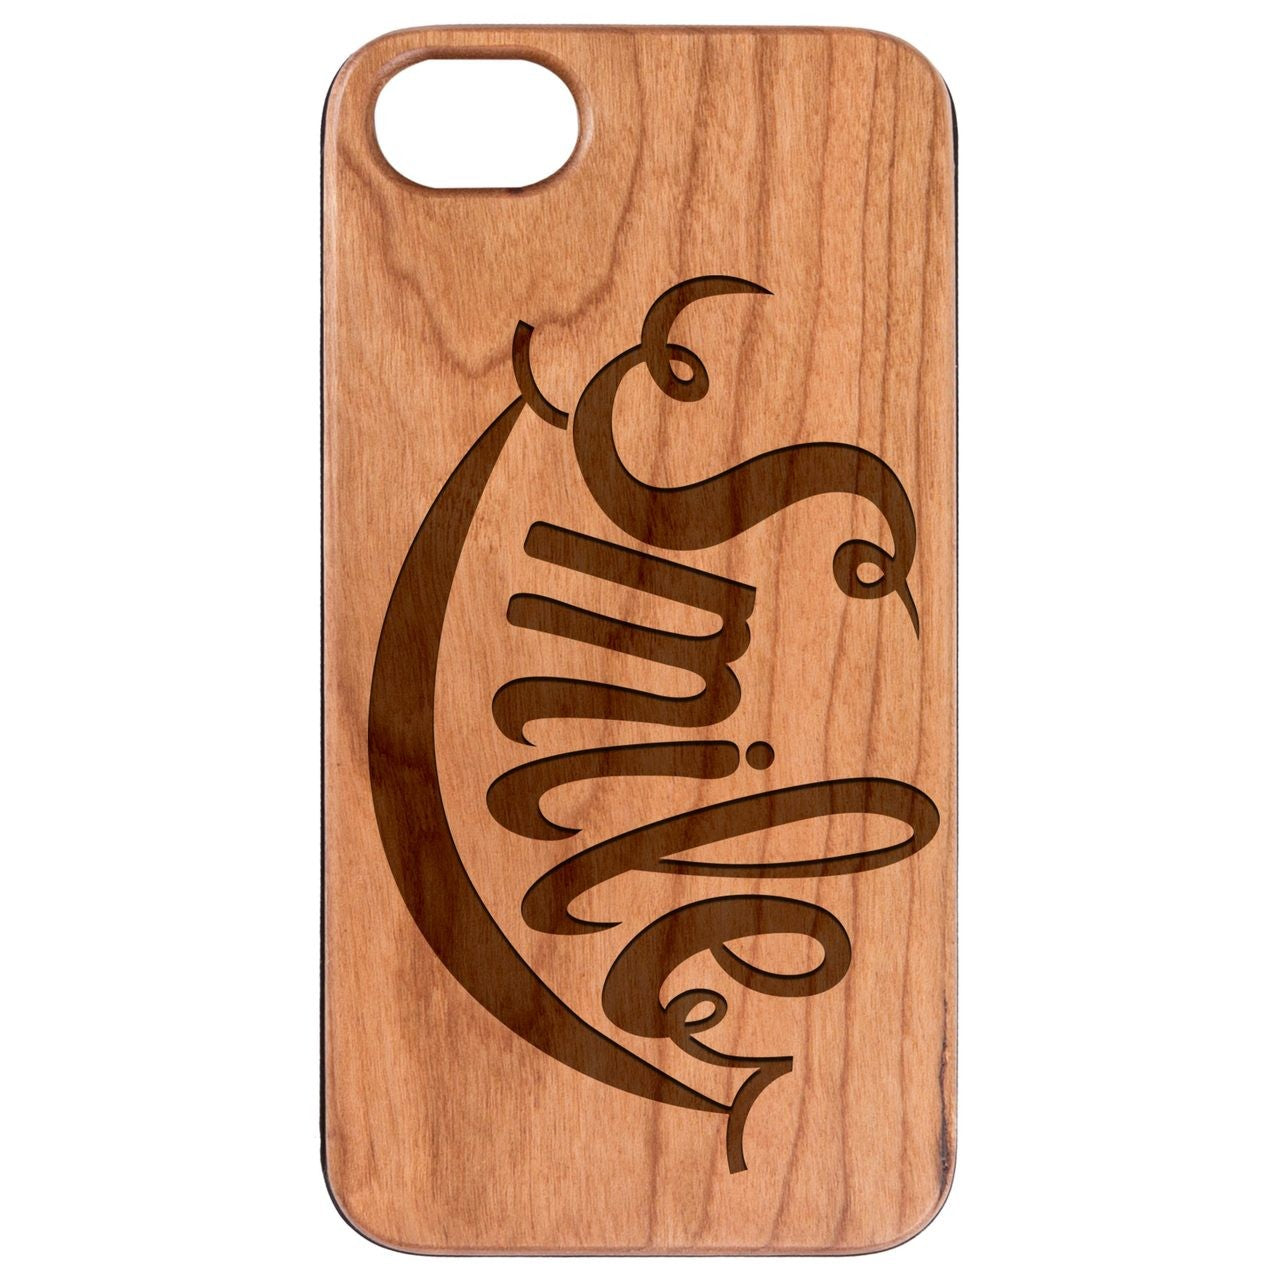  Smile - Engraved - Wooden Phone Case - IPhone 13 Models